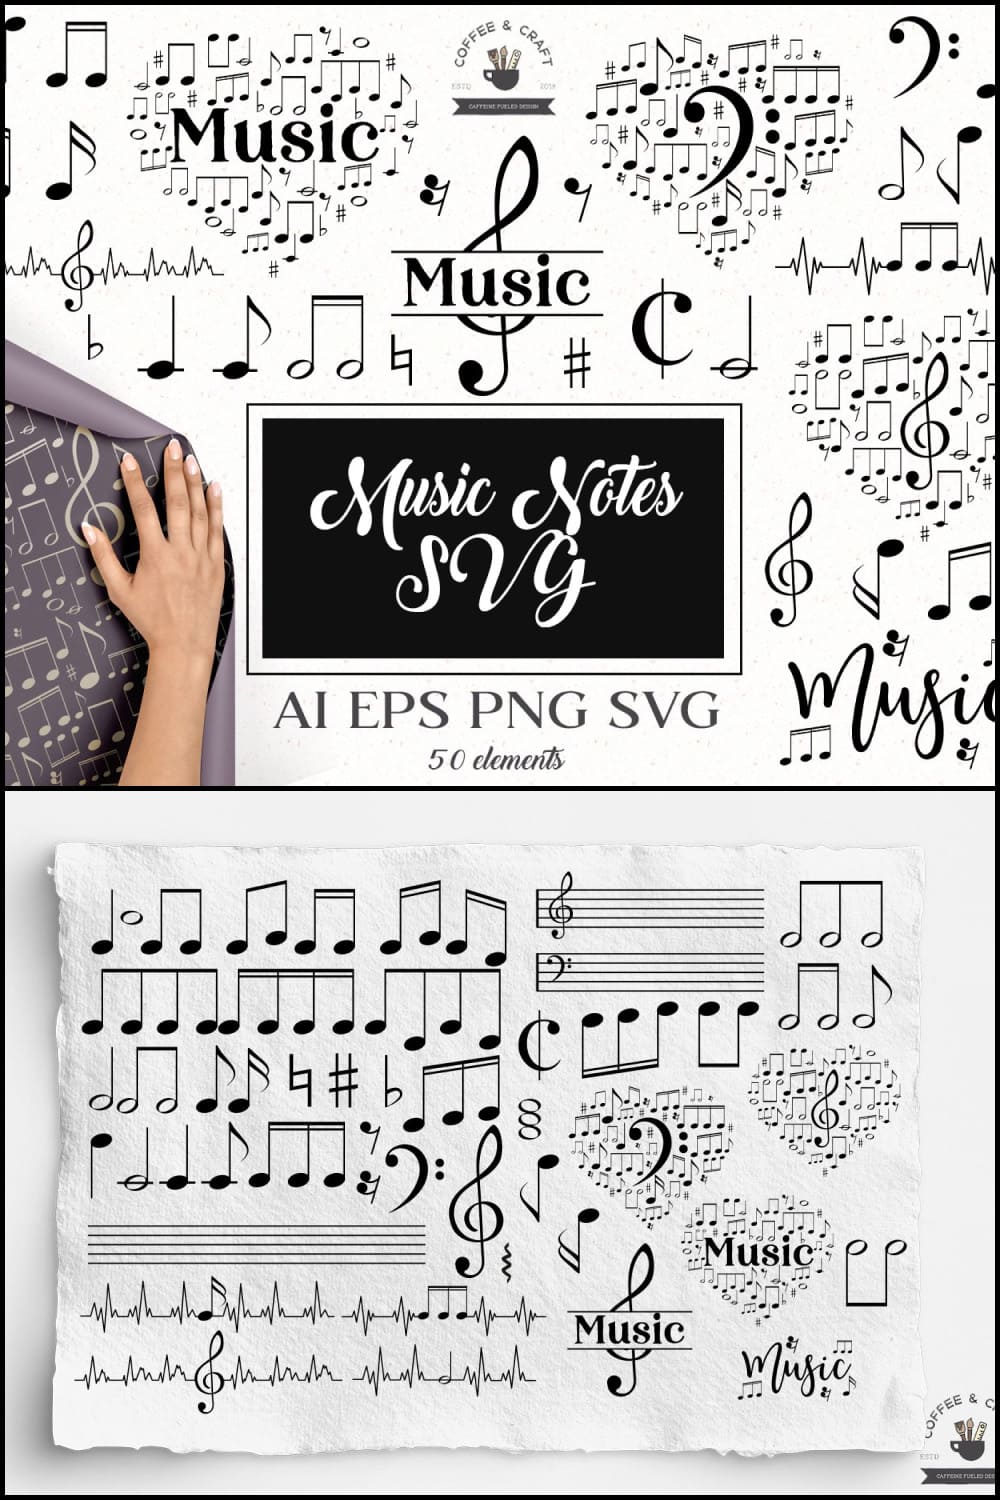 Music notes in svg format.